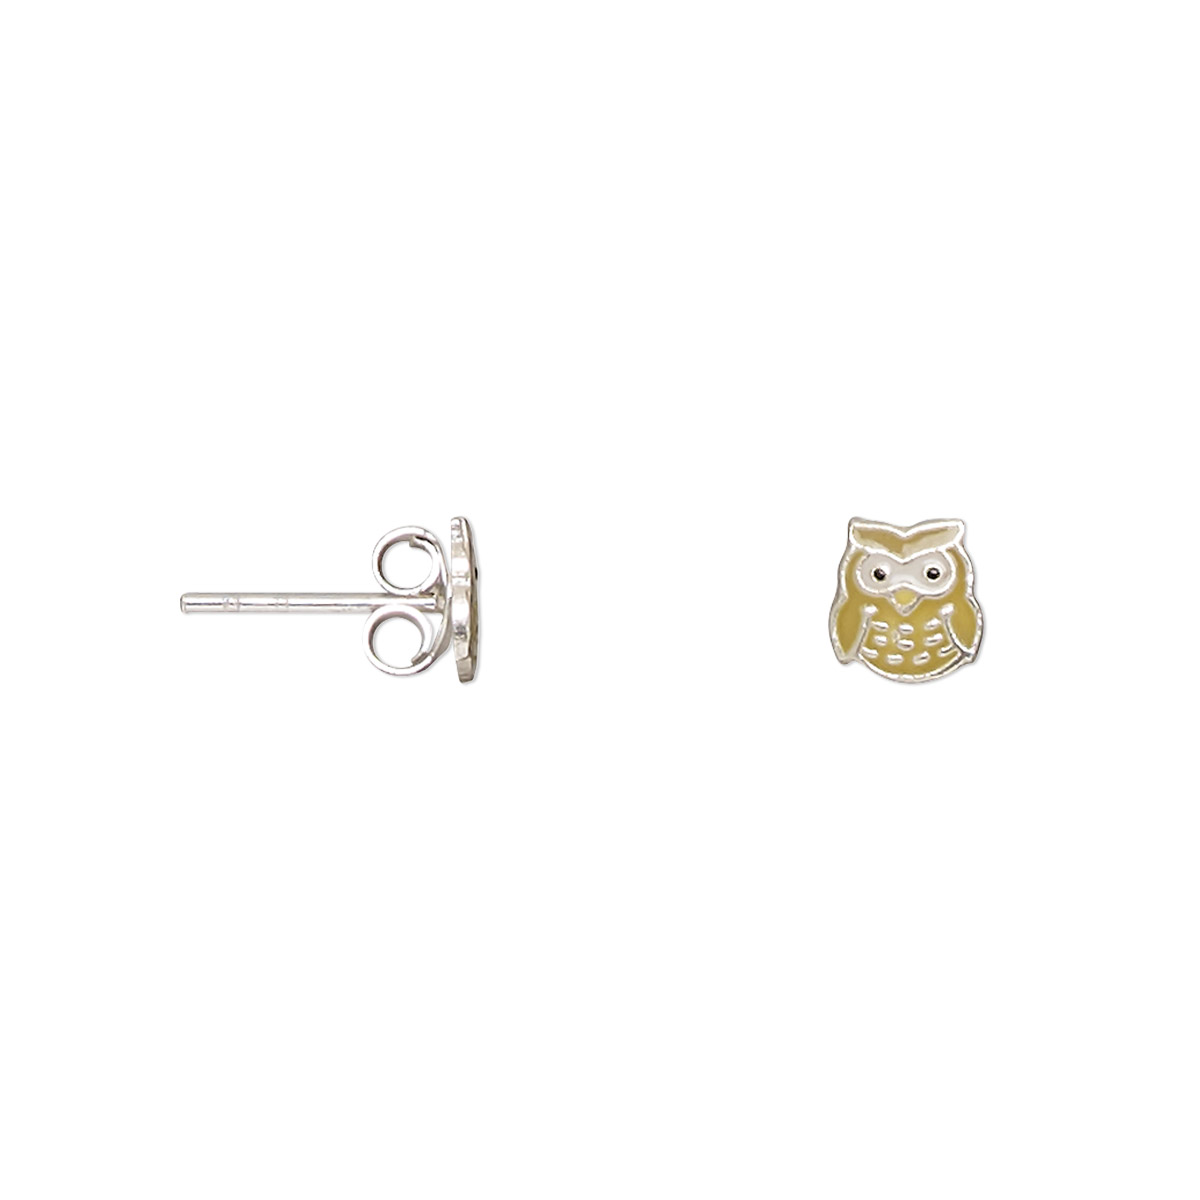 Earstud, enamel and sterling silver, multicolored, 6x5mm owl with post ...